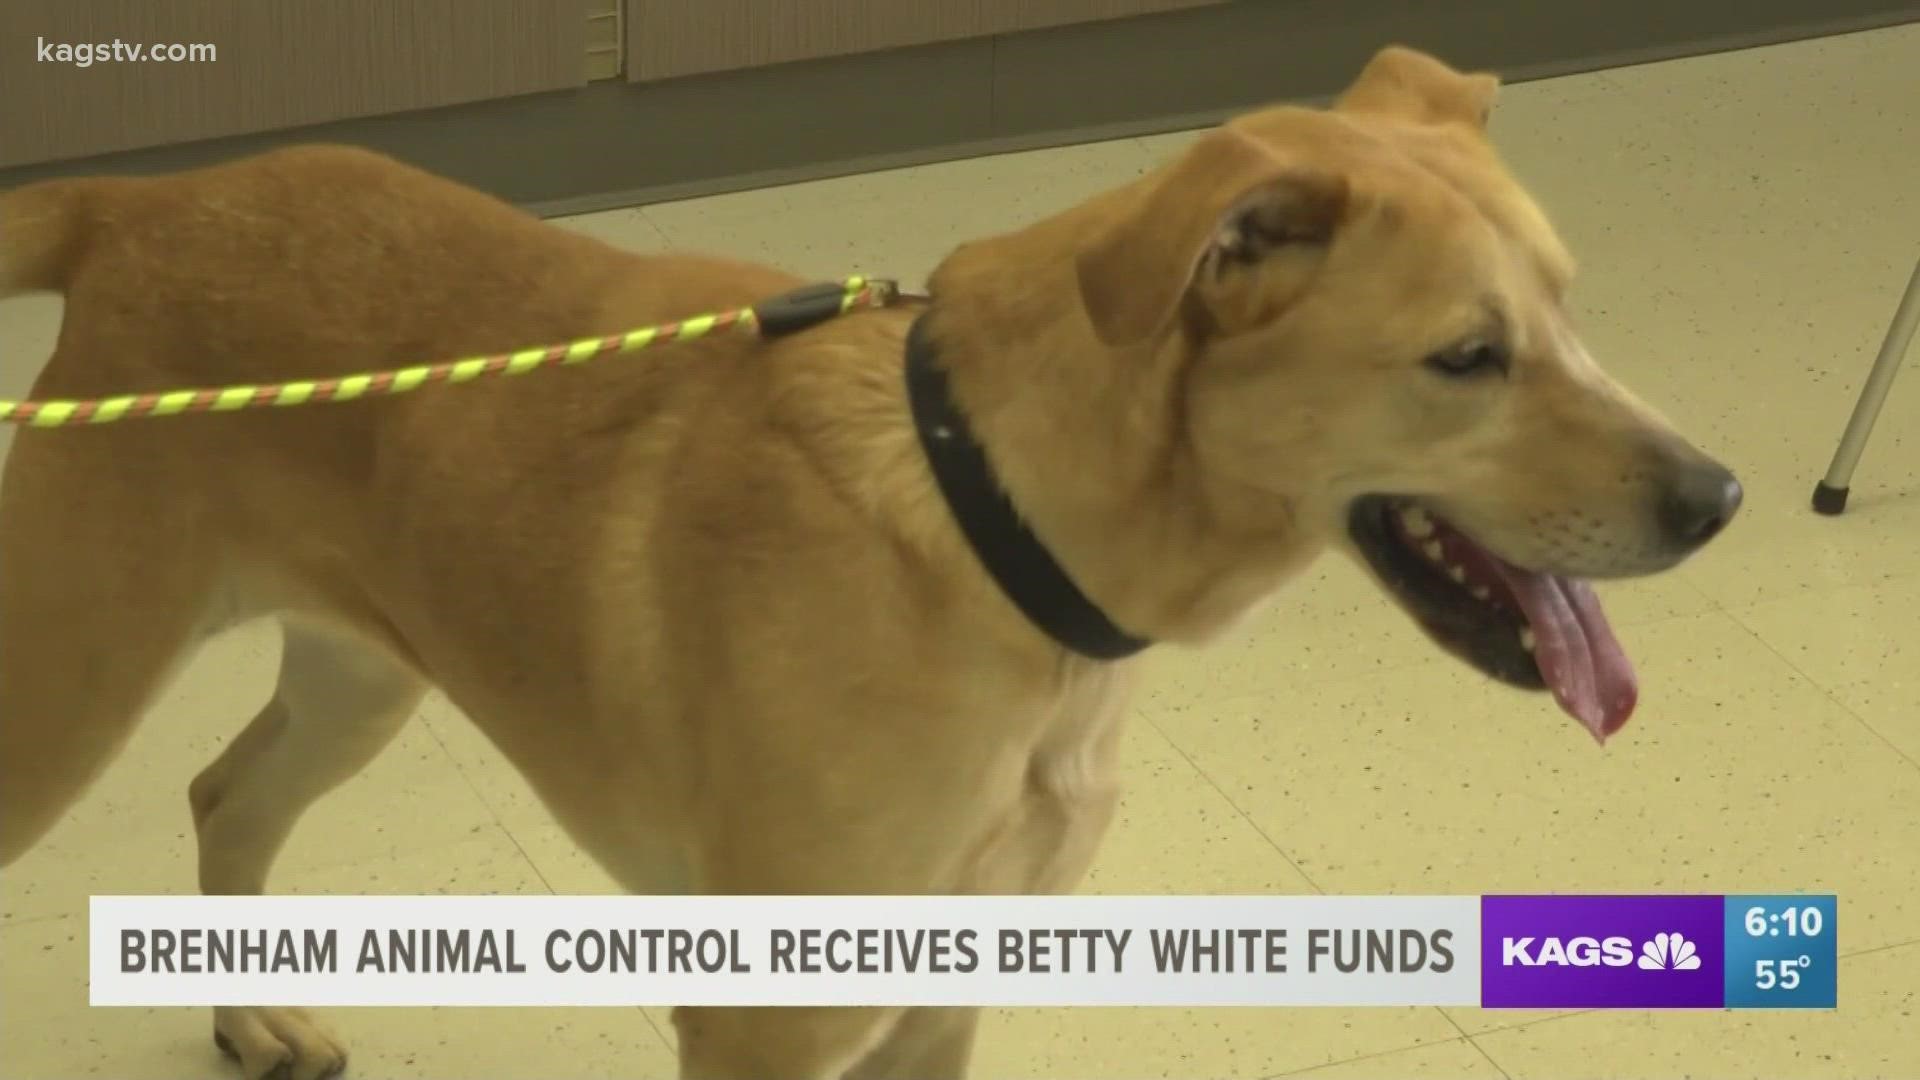 A person who arrived to adopt at the shelter got their furry four-legged friend, which they named Betty.